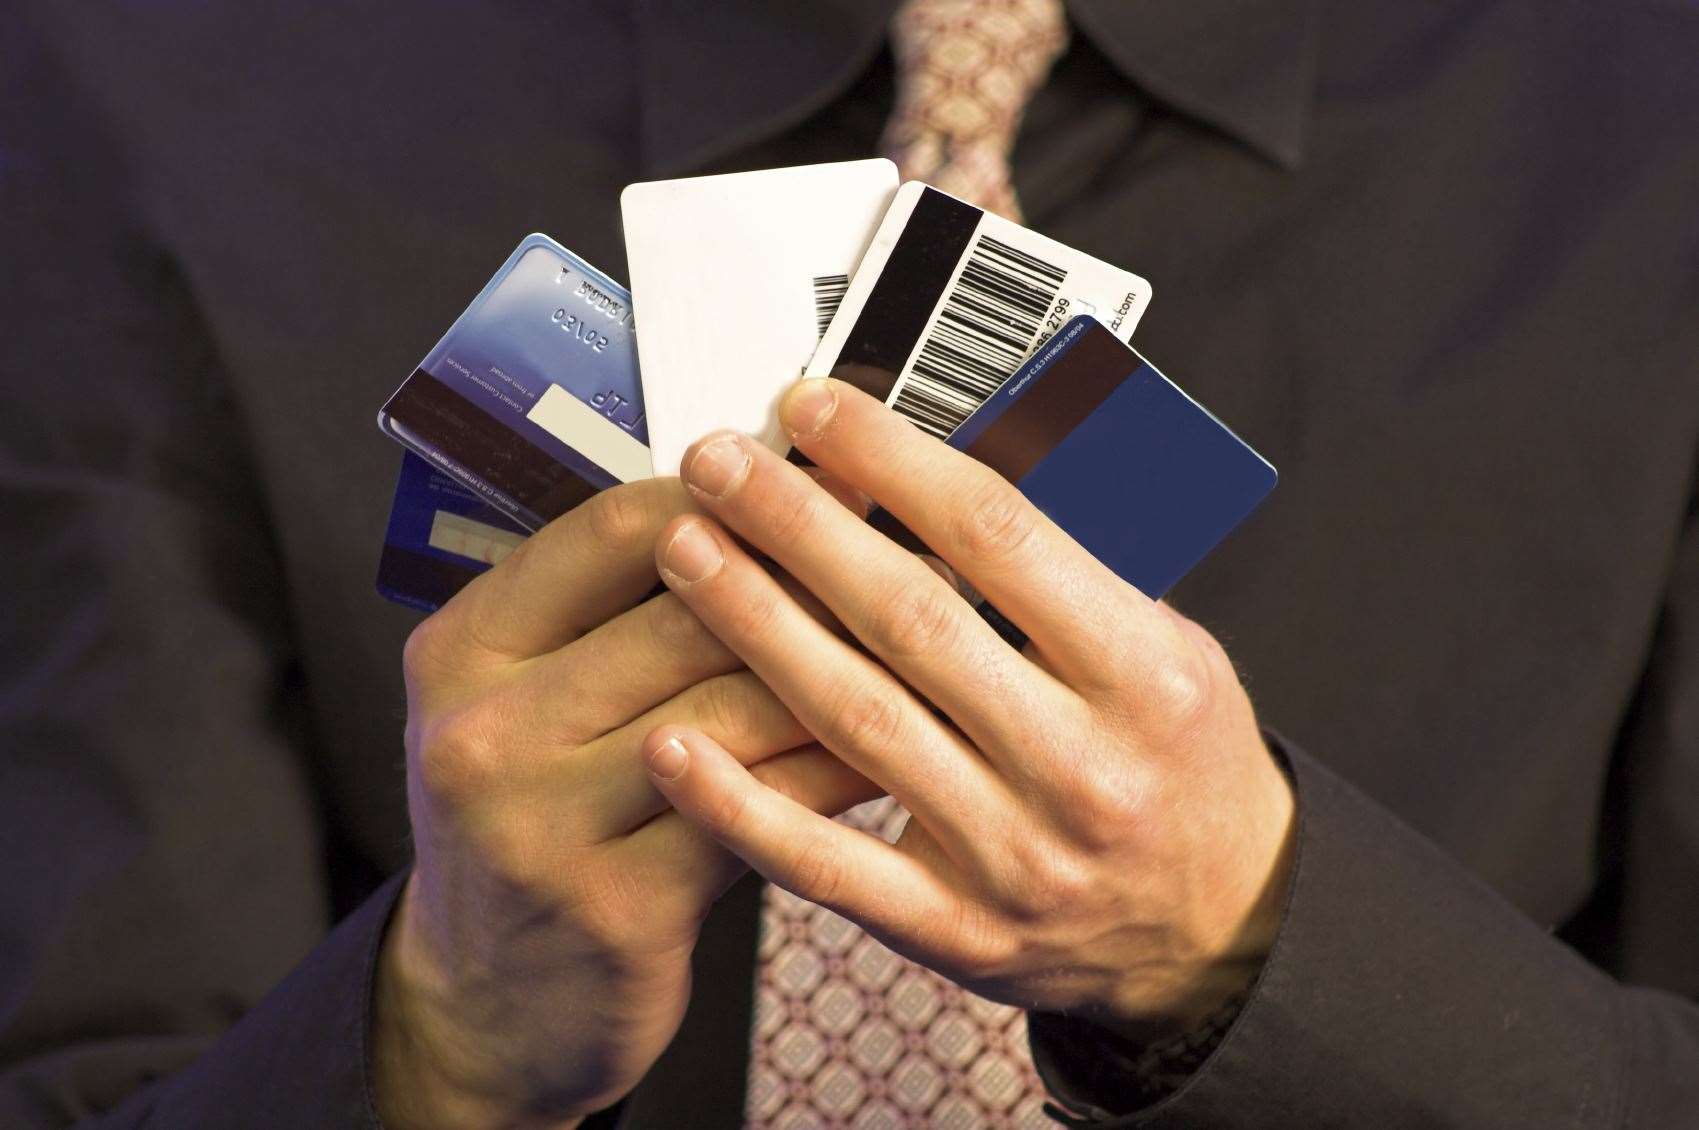 The new checks will apply to both credit and debit cards